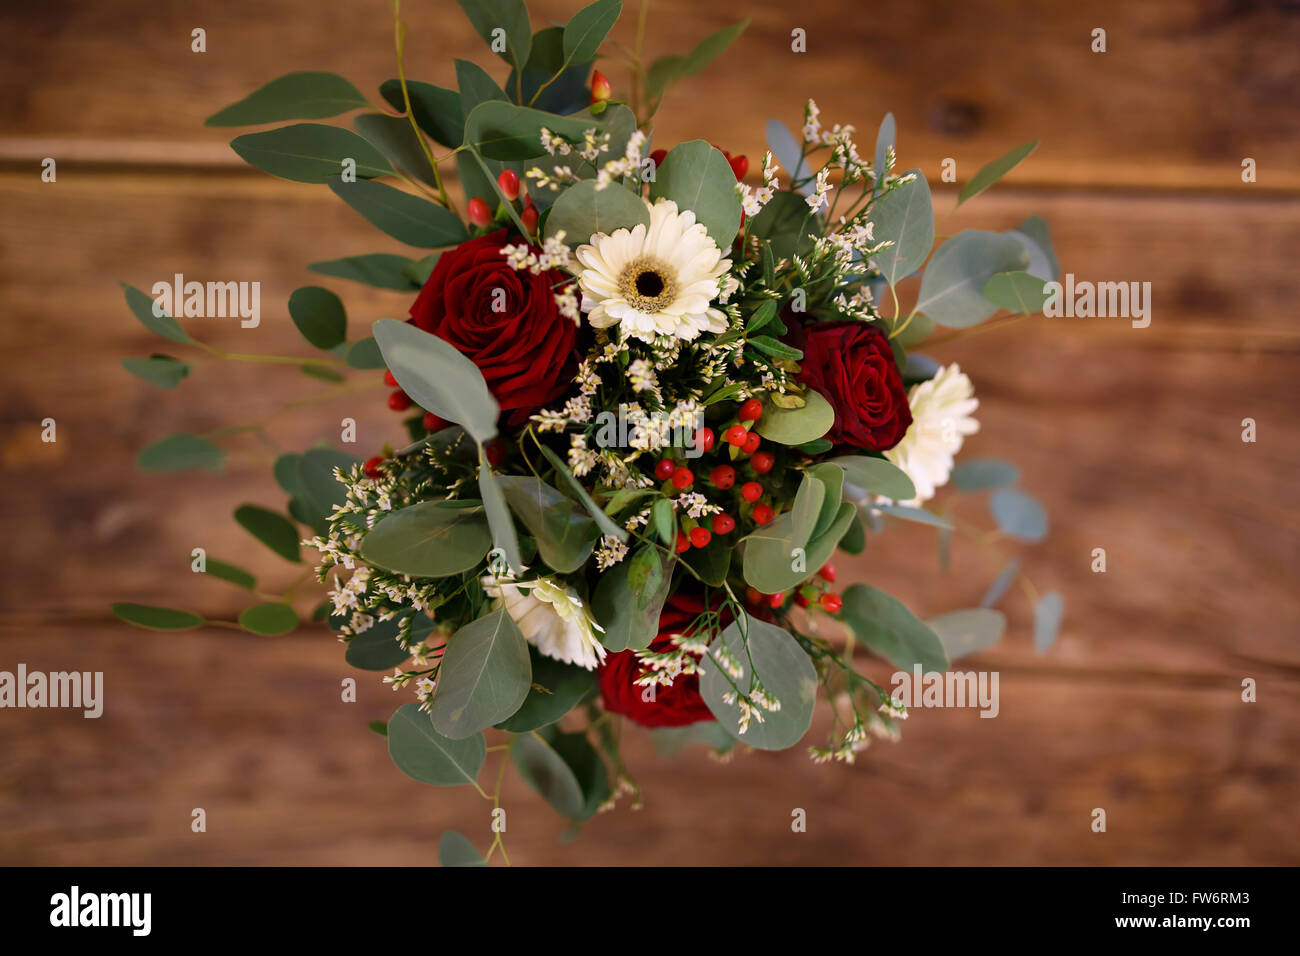 The bridal bouquet on the wooden background Stock Photo